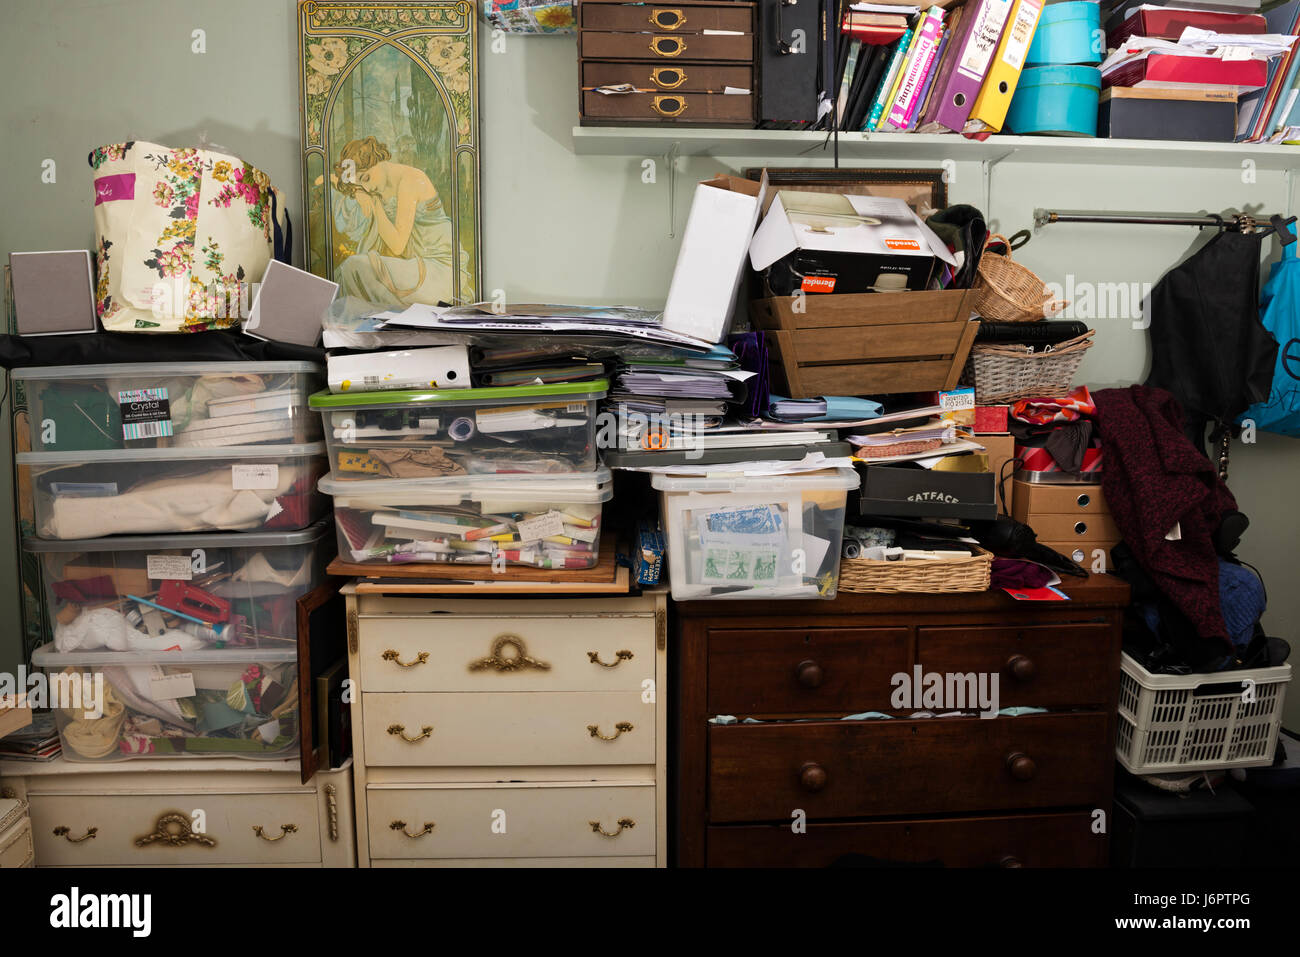 Clutter in small bedroom Stock Photo